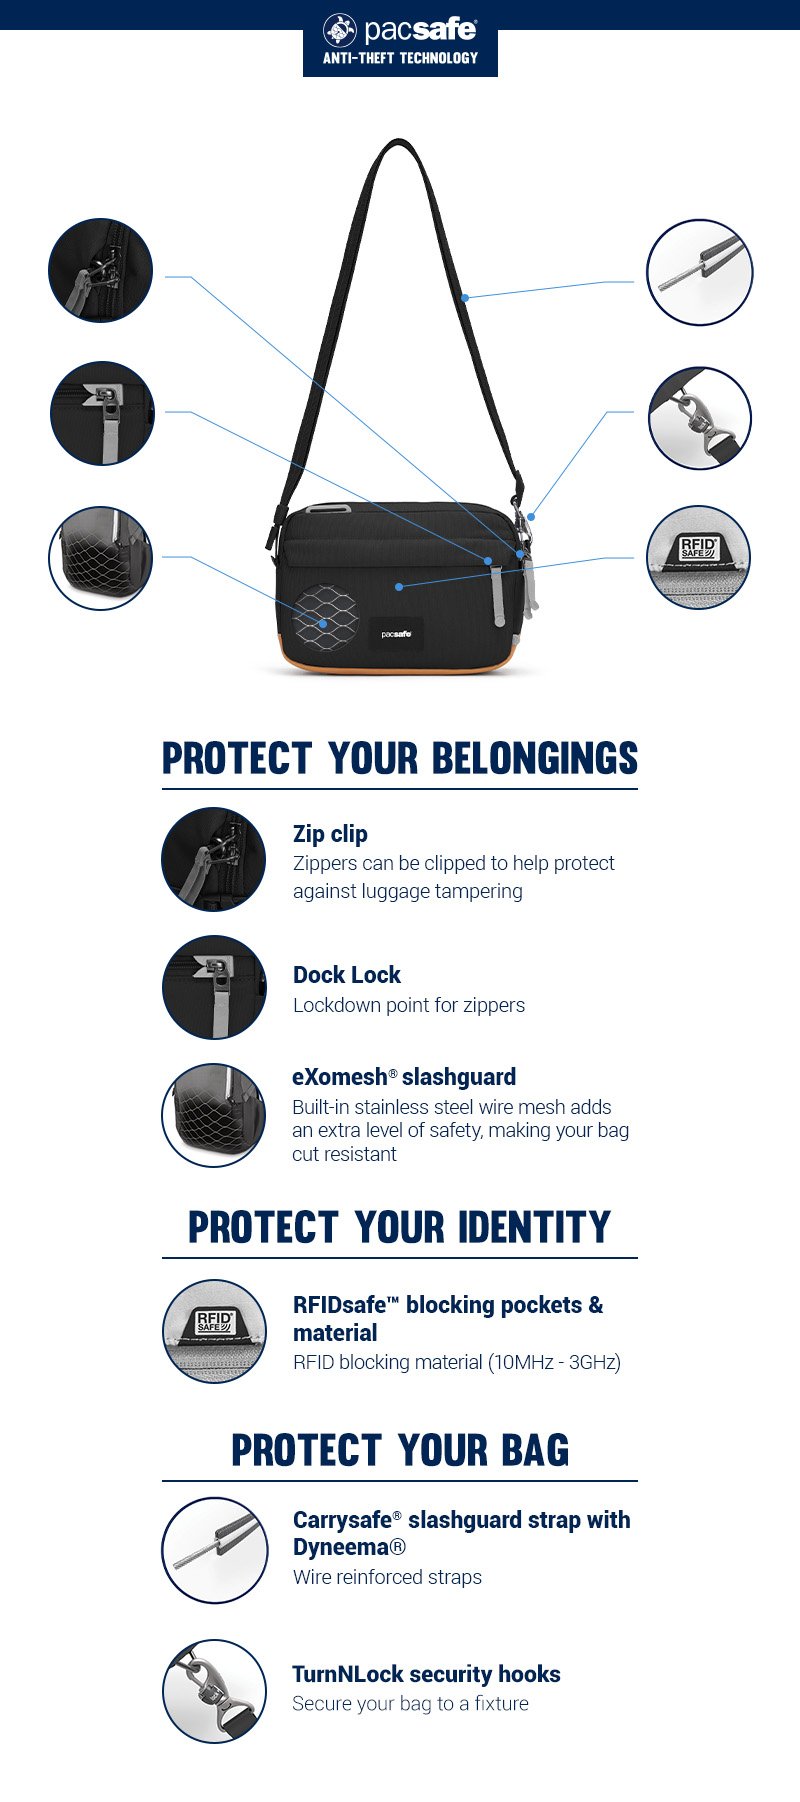 Protect Your Belongs - Zip Clip - Zippers can be clipped to help protect against luggage tempering.
Dock lock - Lock down point for zippers.
eXomesh slashguard - Built-in stainless steel wire mesh adds an extra level of safety, making your bag cut resistant.
Protect Your Bag - Carrysafe slashguard strap with Dyneema - wire reinforced straps.
TurnNLock security hooks - Secure your bag to a fixture.
Protect Your Identity - RFIDsafe blocking pockets & material - RFID blocking material (10 MHz - 3 GHz)